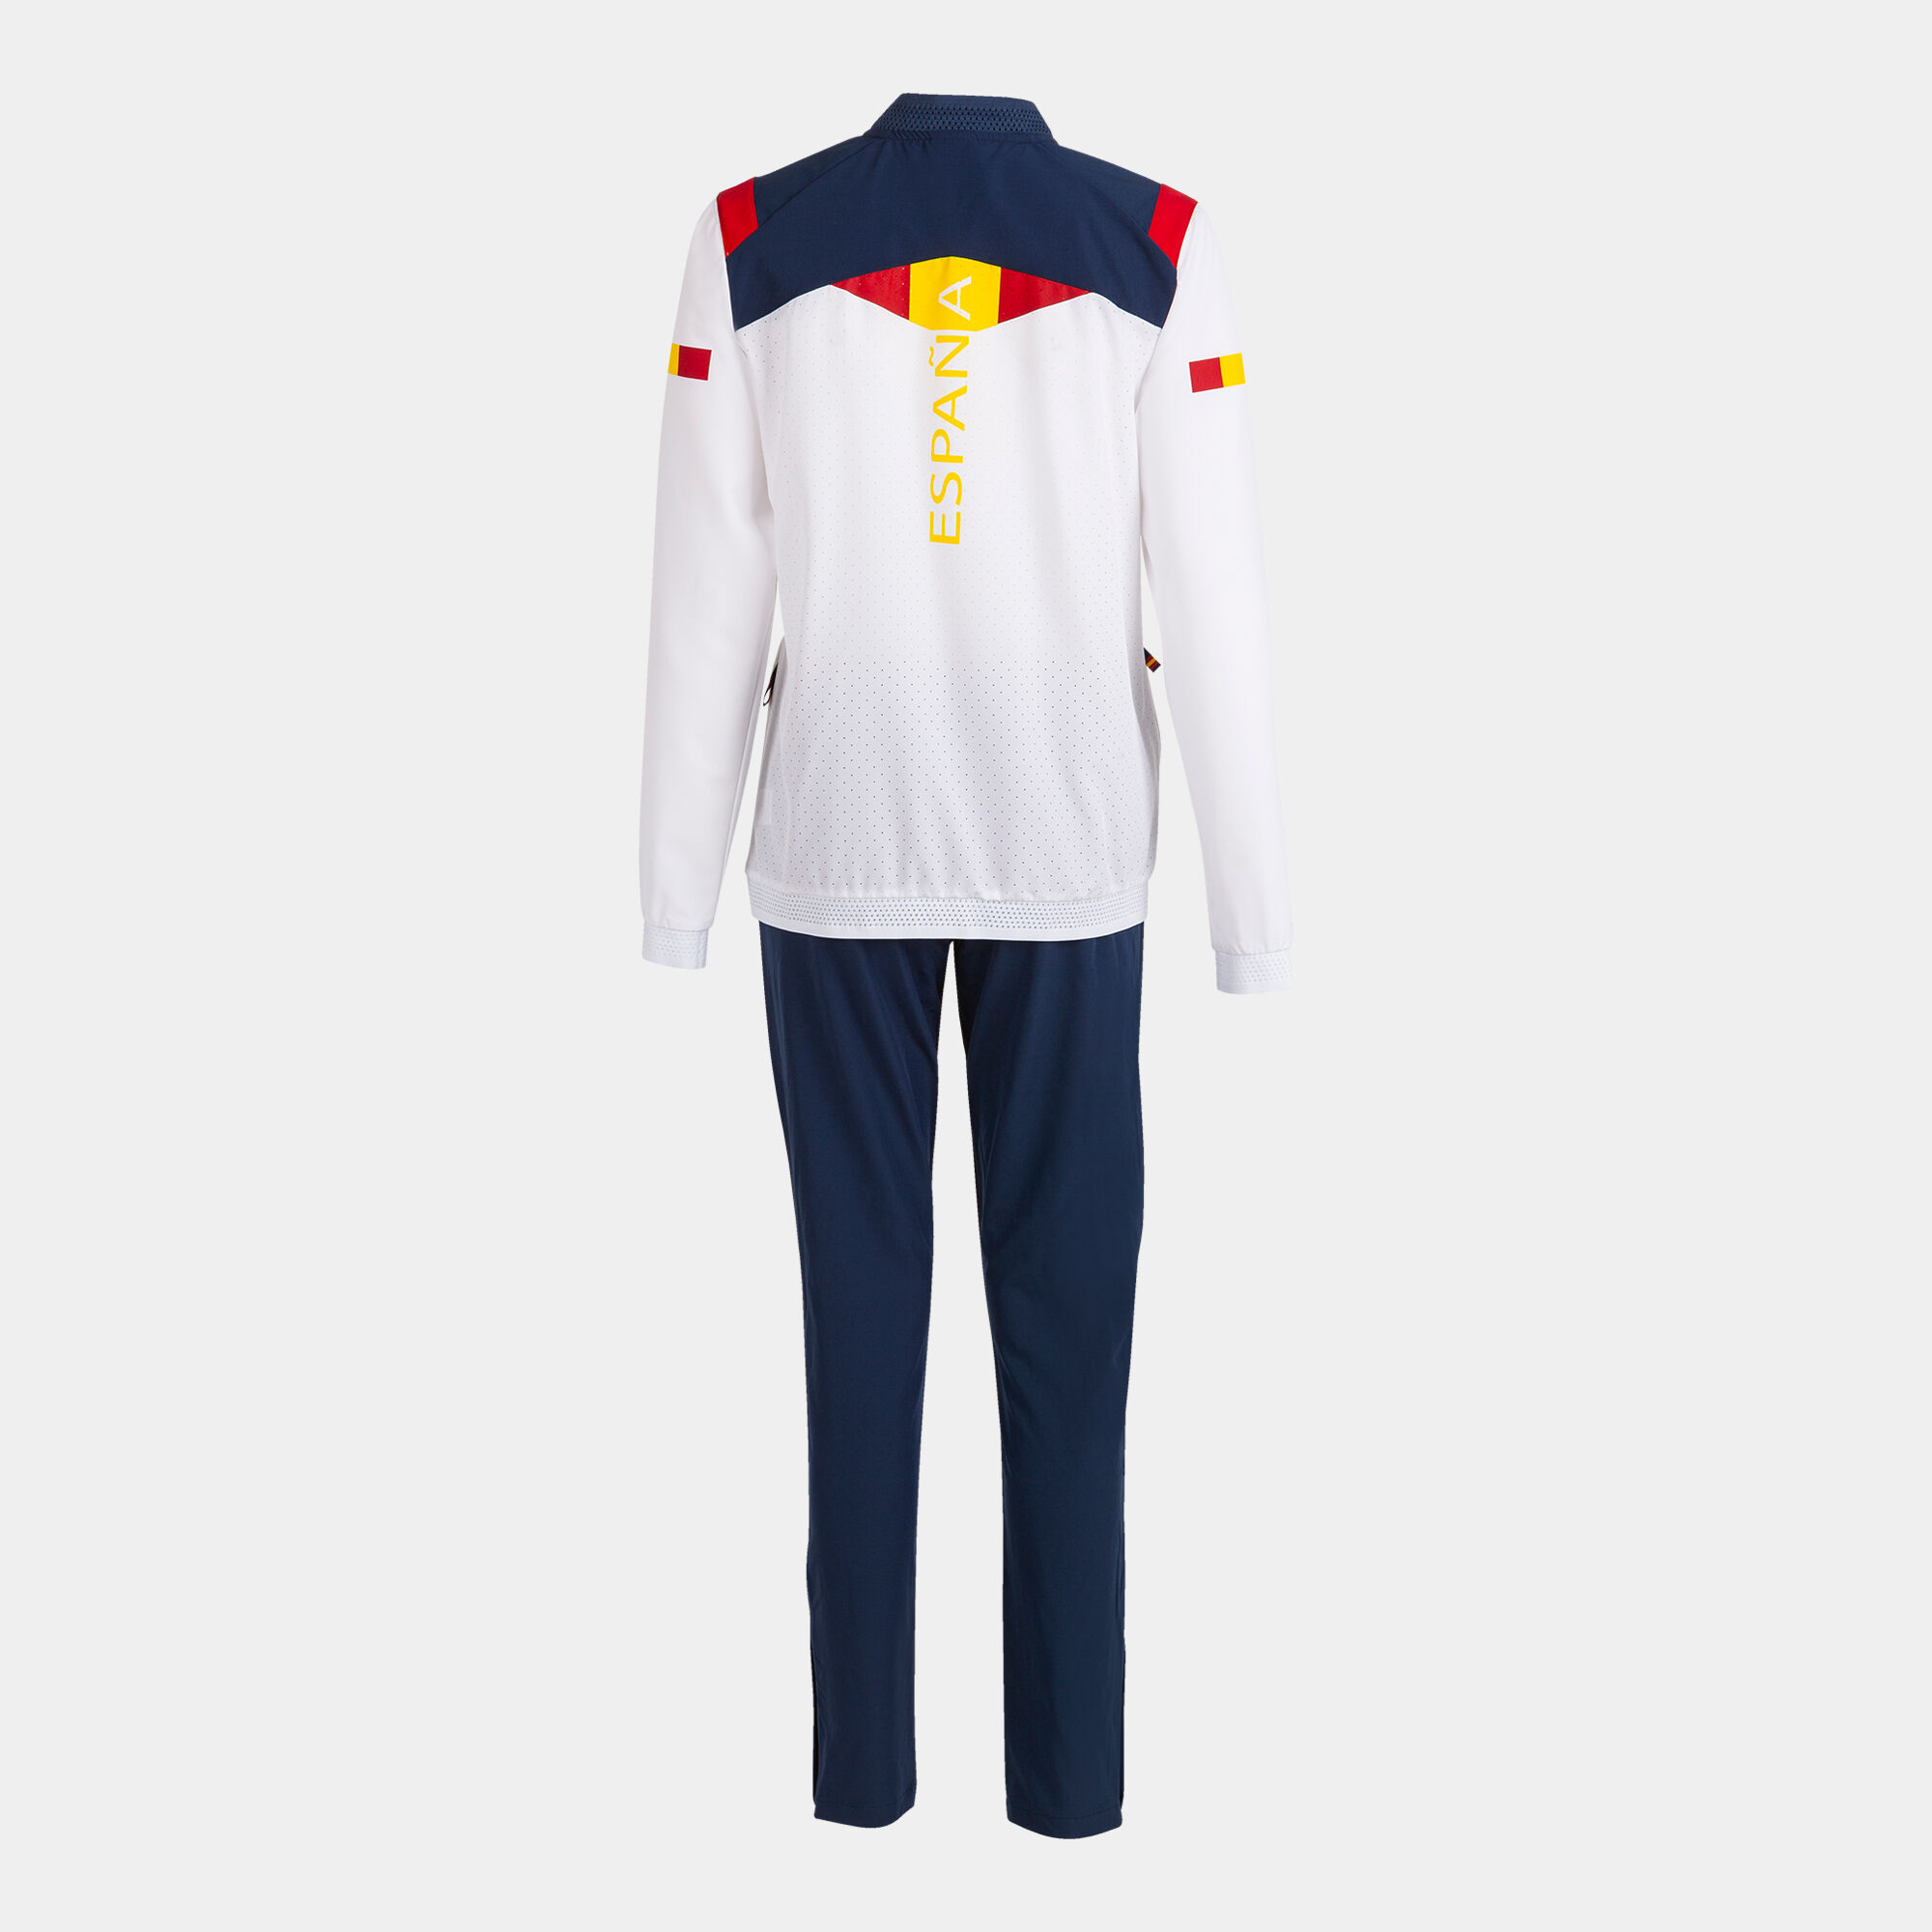 Tracksuit podium Spanish Olympic Committee woman